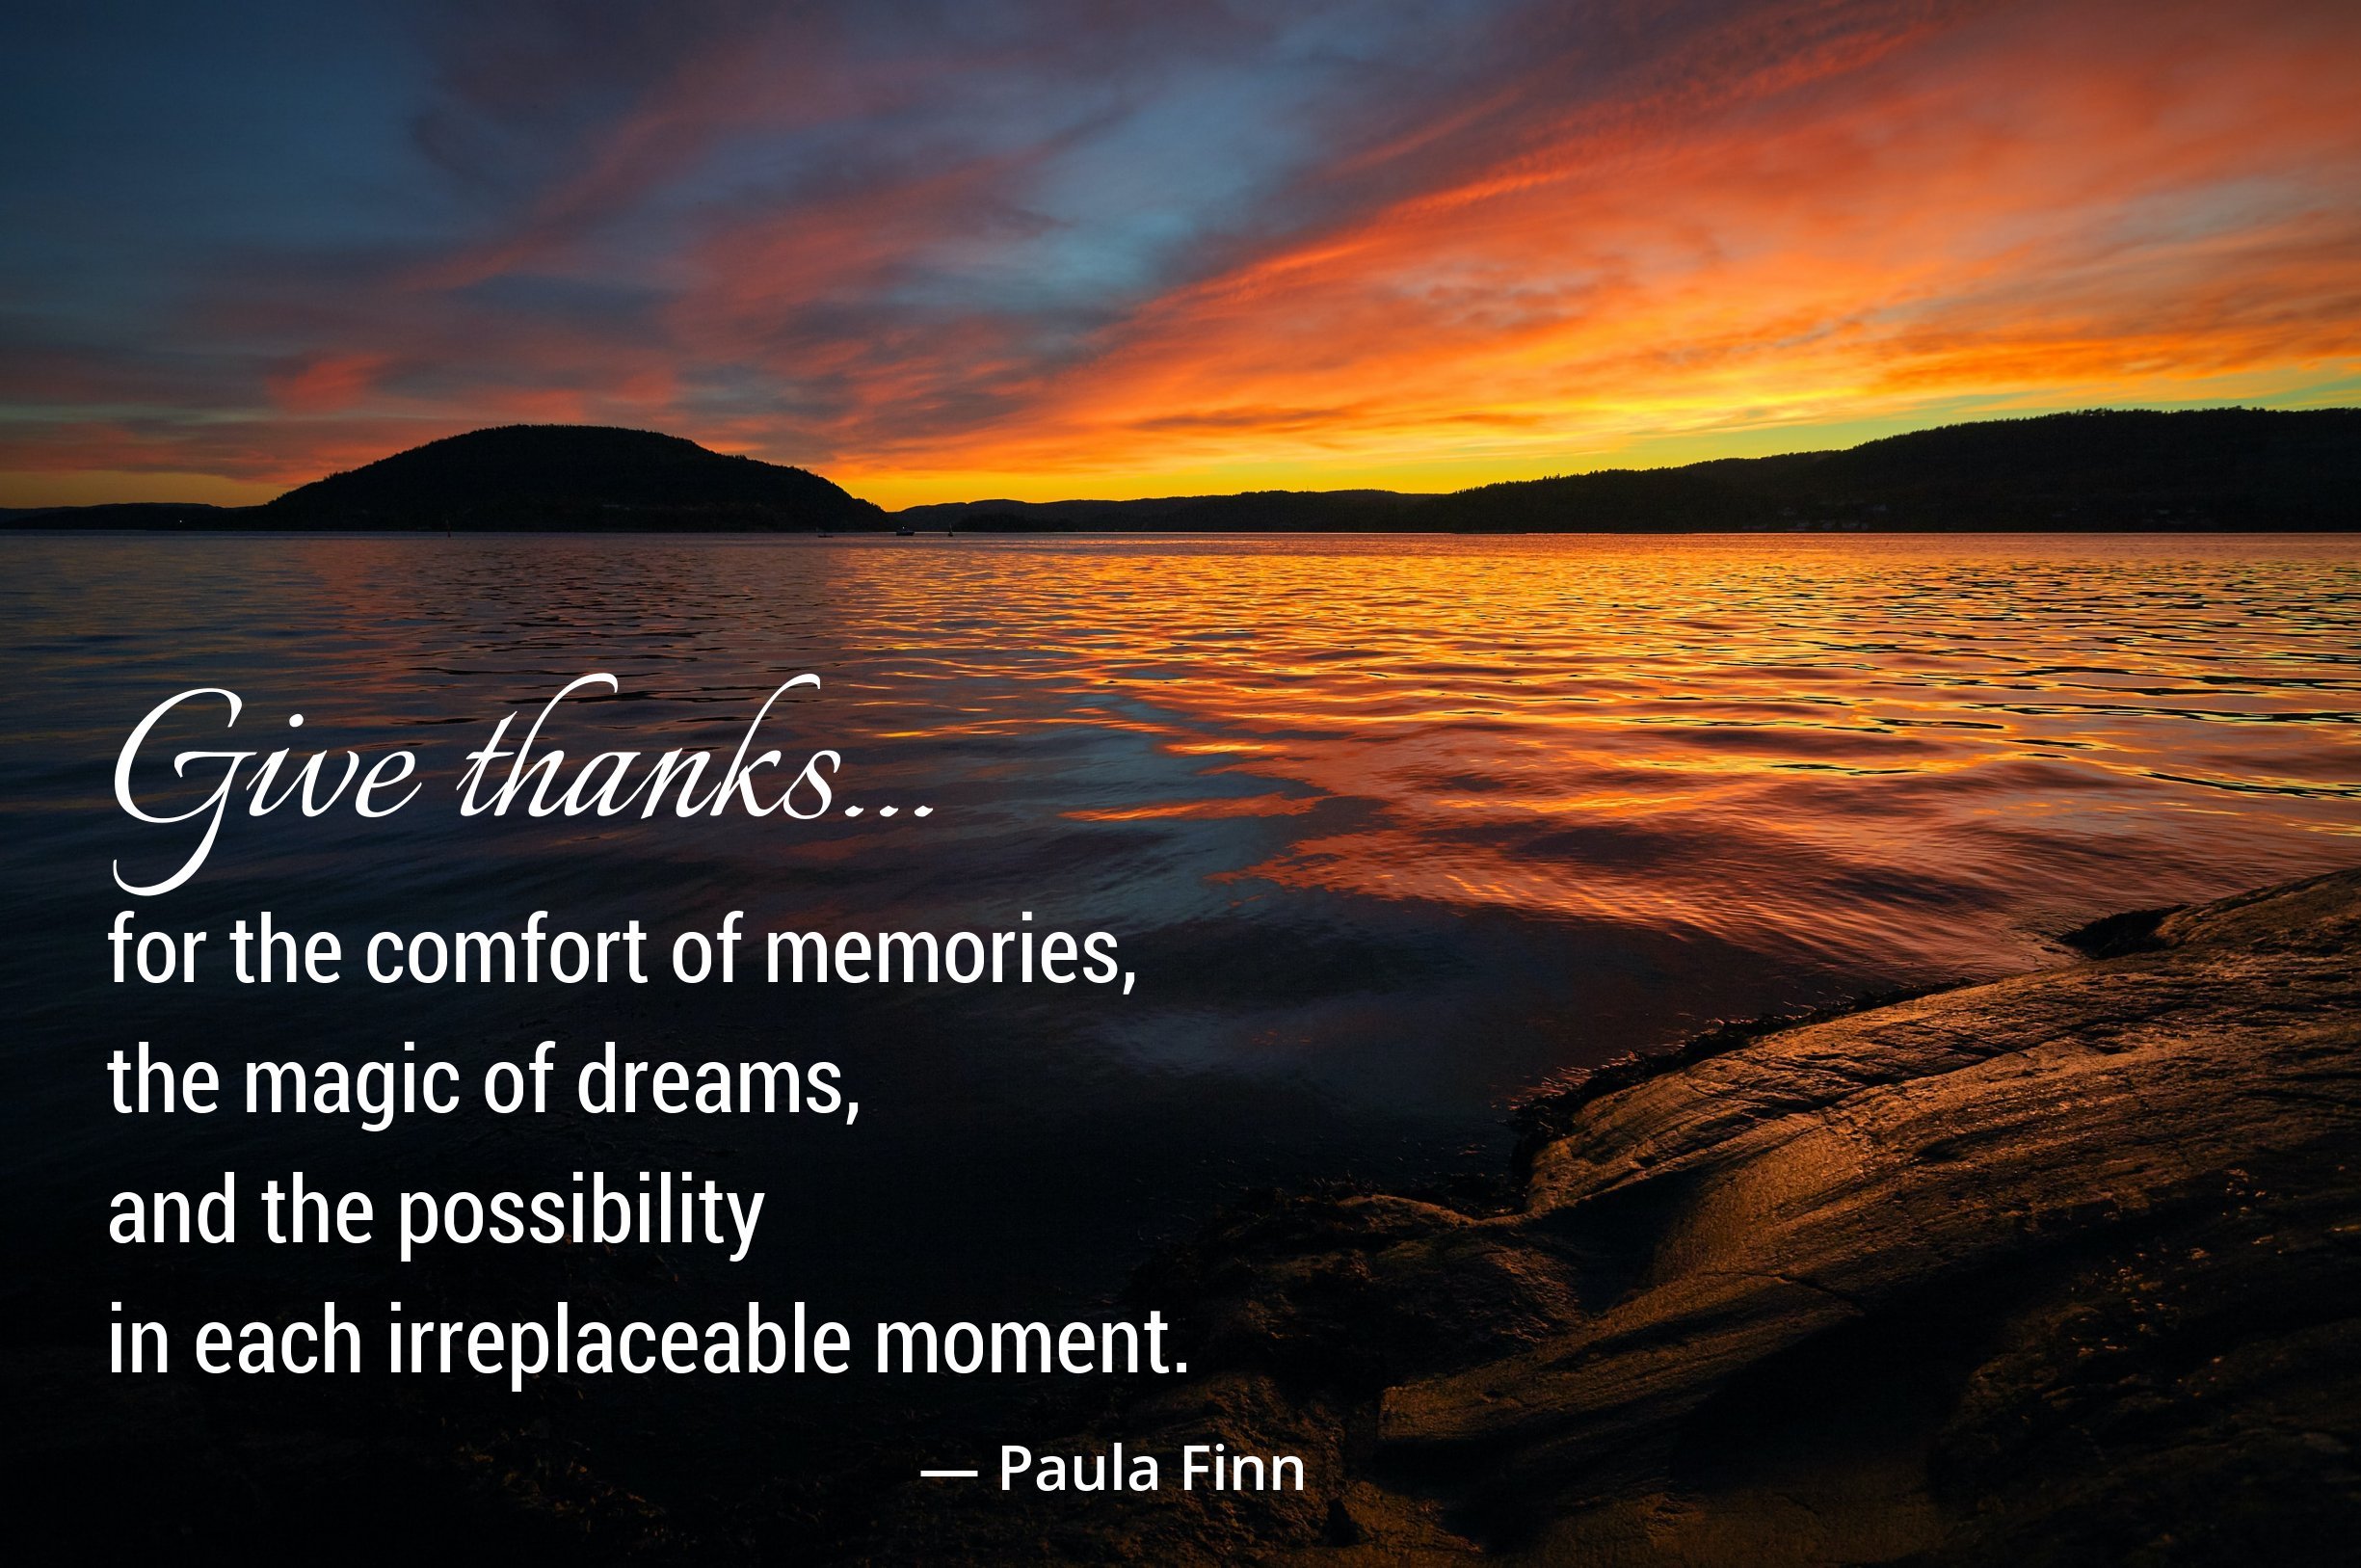 Thoughts to Hold on Twitter: "Give thanks for the comfort of memories, the  magic of dreams, and the possibility in each irreplaceable moment. ~ Paula  Finn @QuoteILoveU #gratitude #inspirational #quote #memories #magic #